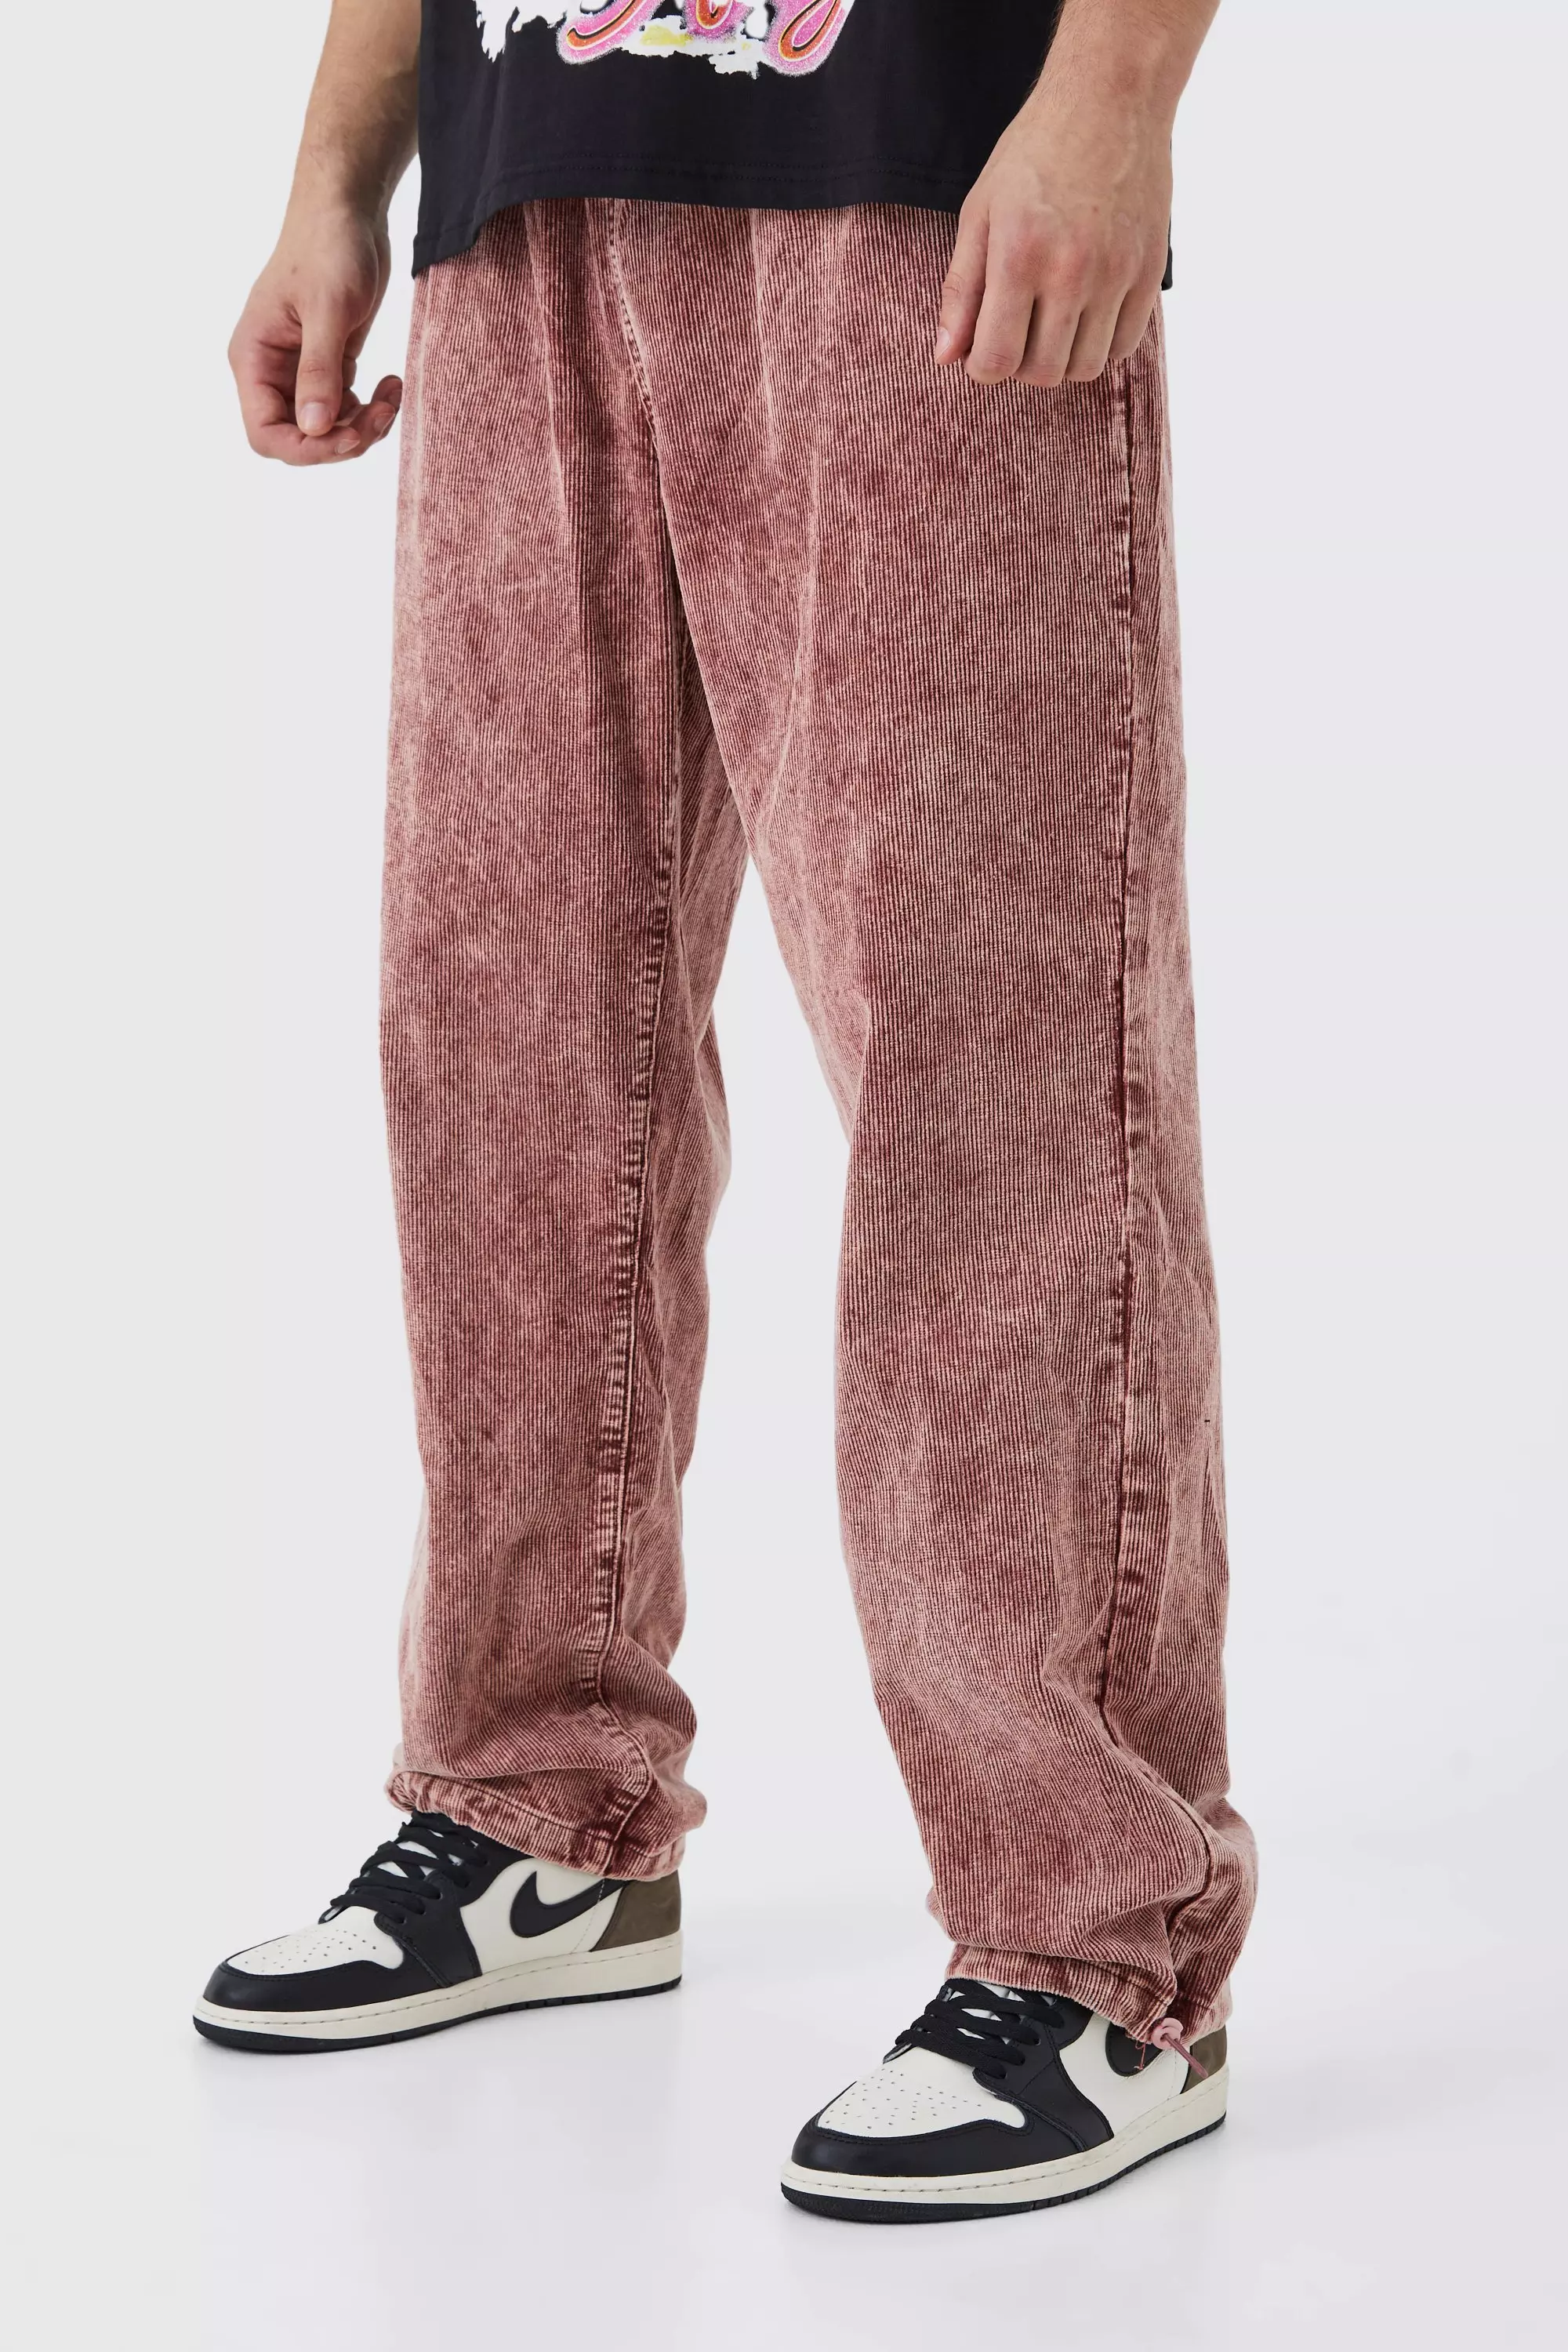 Burgundy Red Tall Relaxed Acid Wash Cord Pants